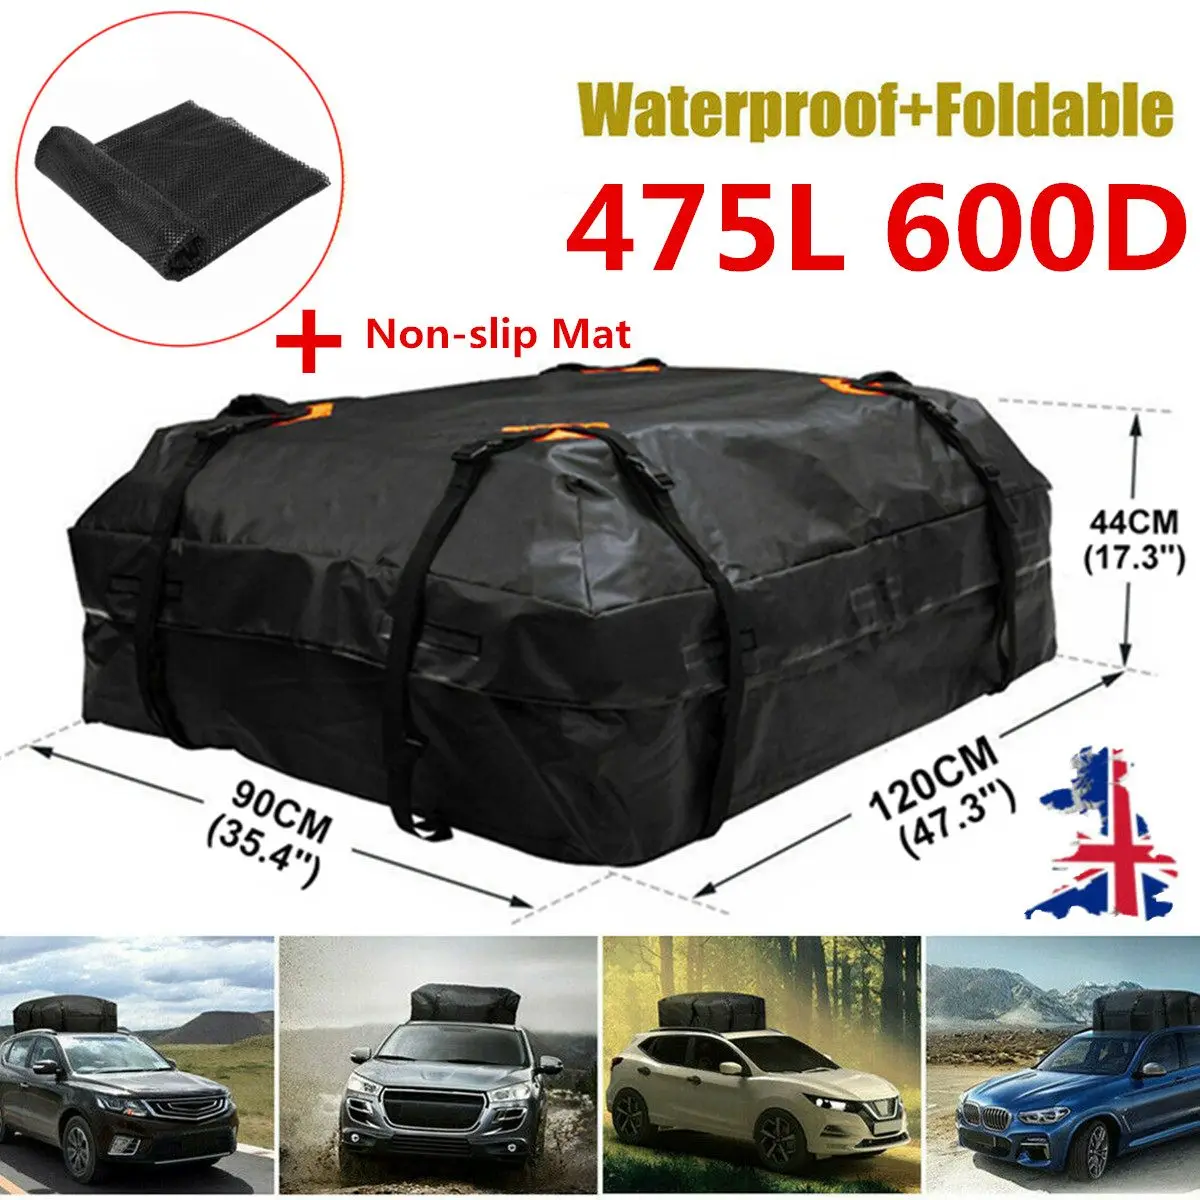 

600D/420D 120x90x44cm Large Waterproof Car Cargo Roof Bag Rooftop Luggage Carrier Black Storage Cube Bag Travel SUV Van For Cars